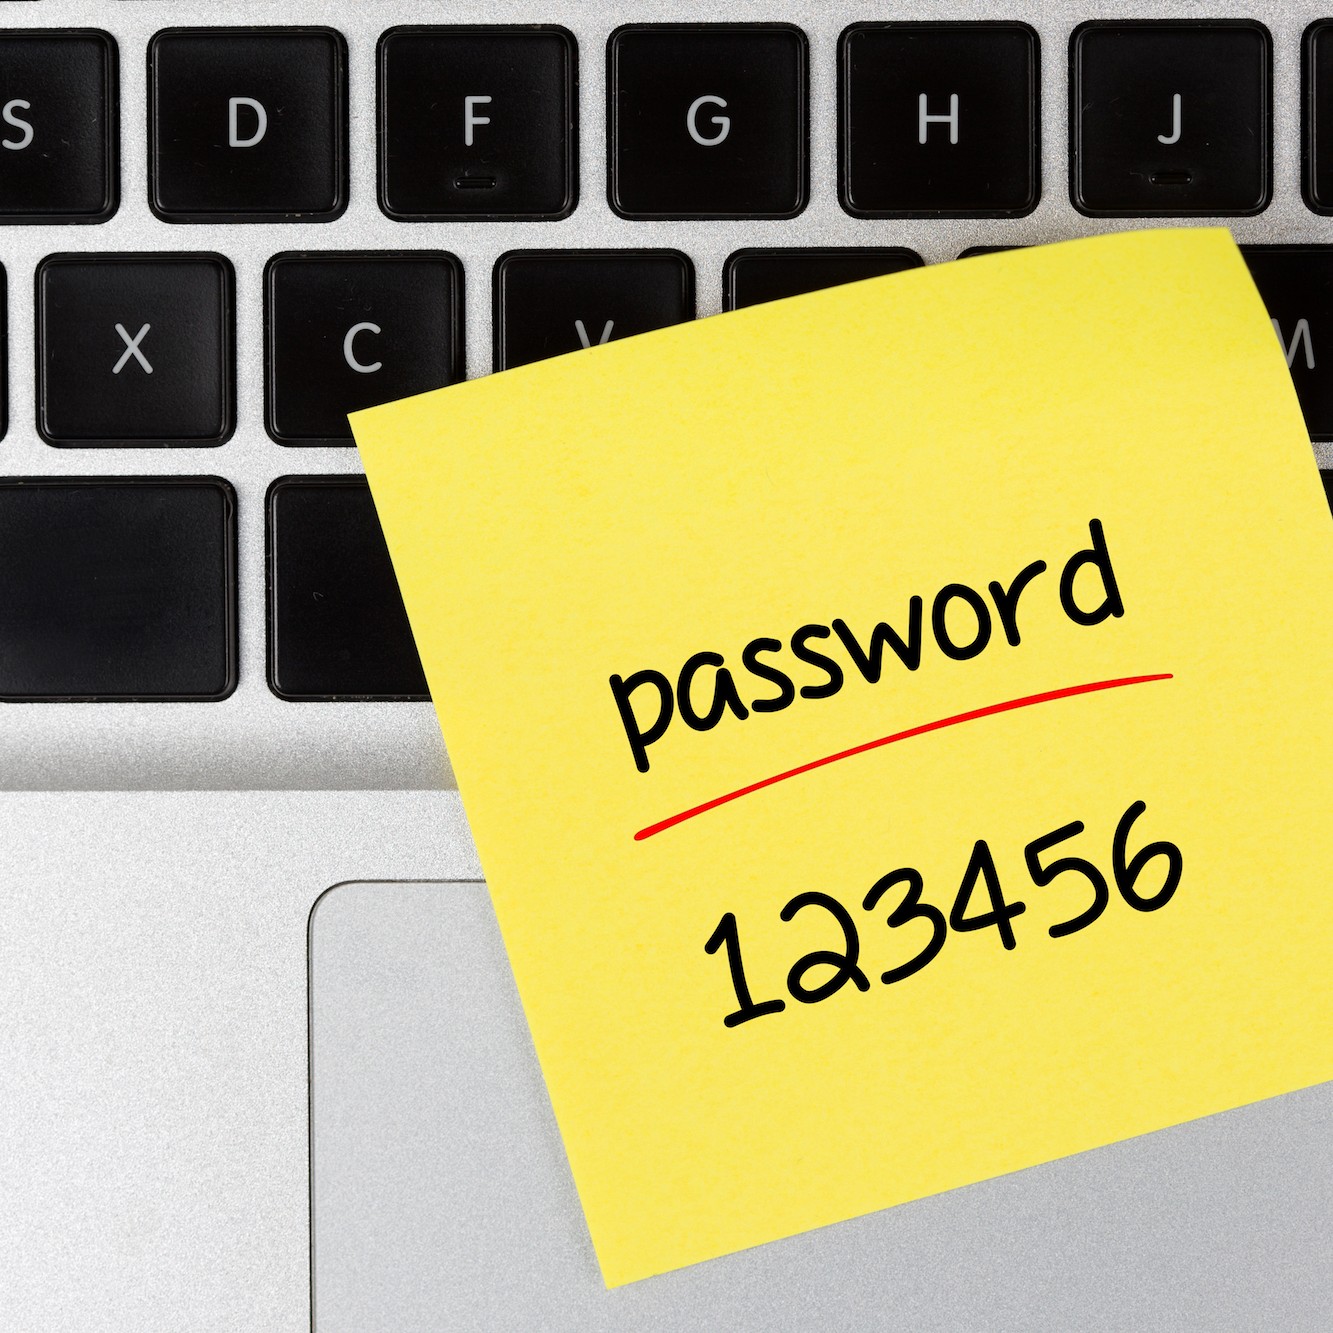 Donald Is Now One Of The Top 25 Most Commonly Used Passwords